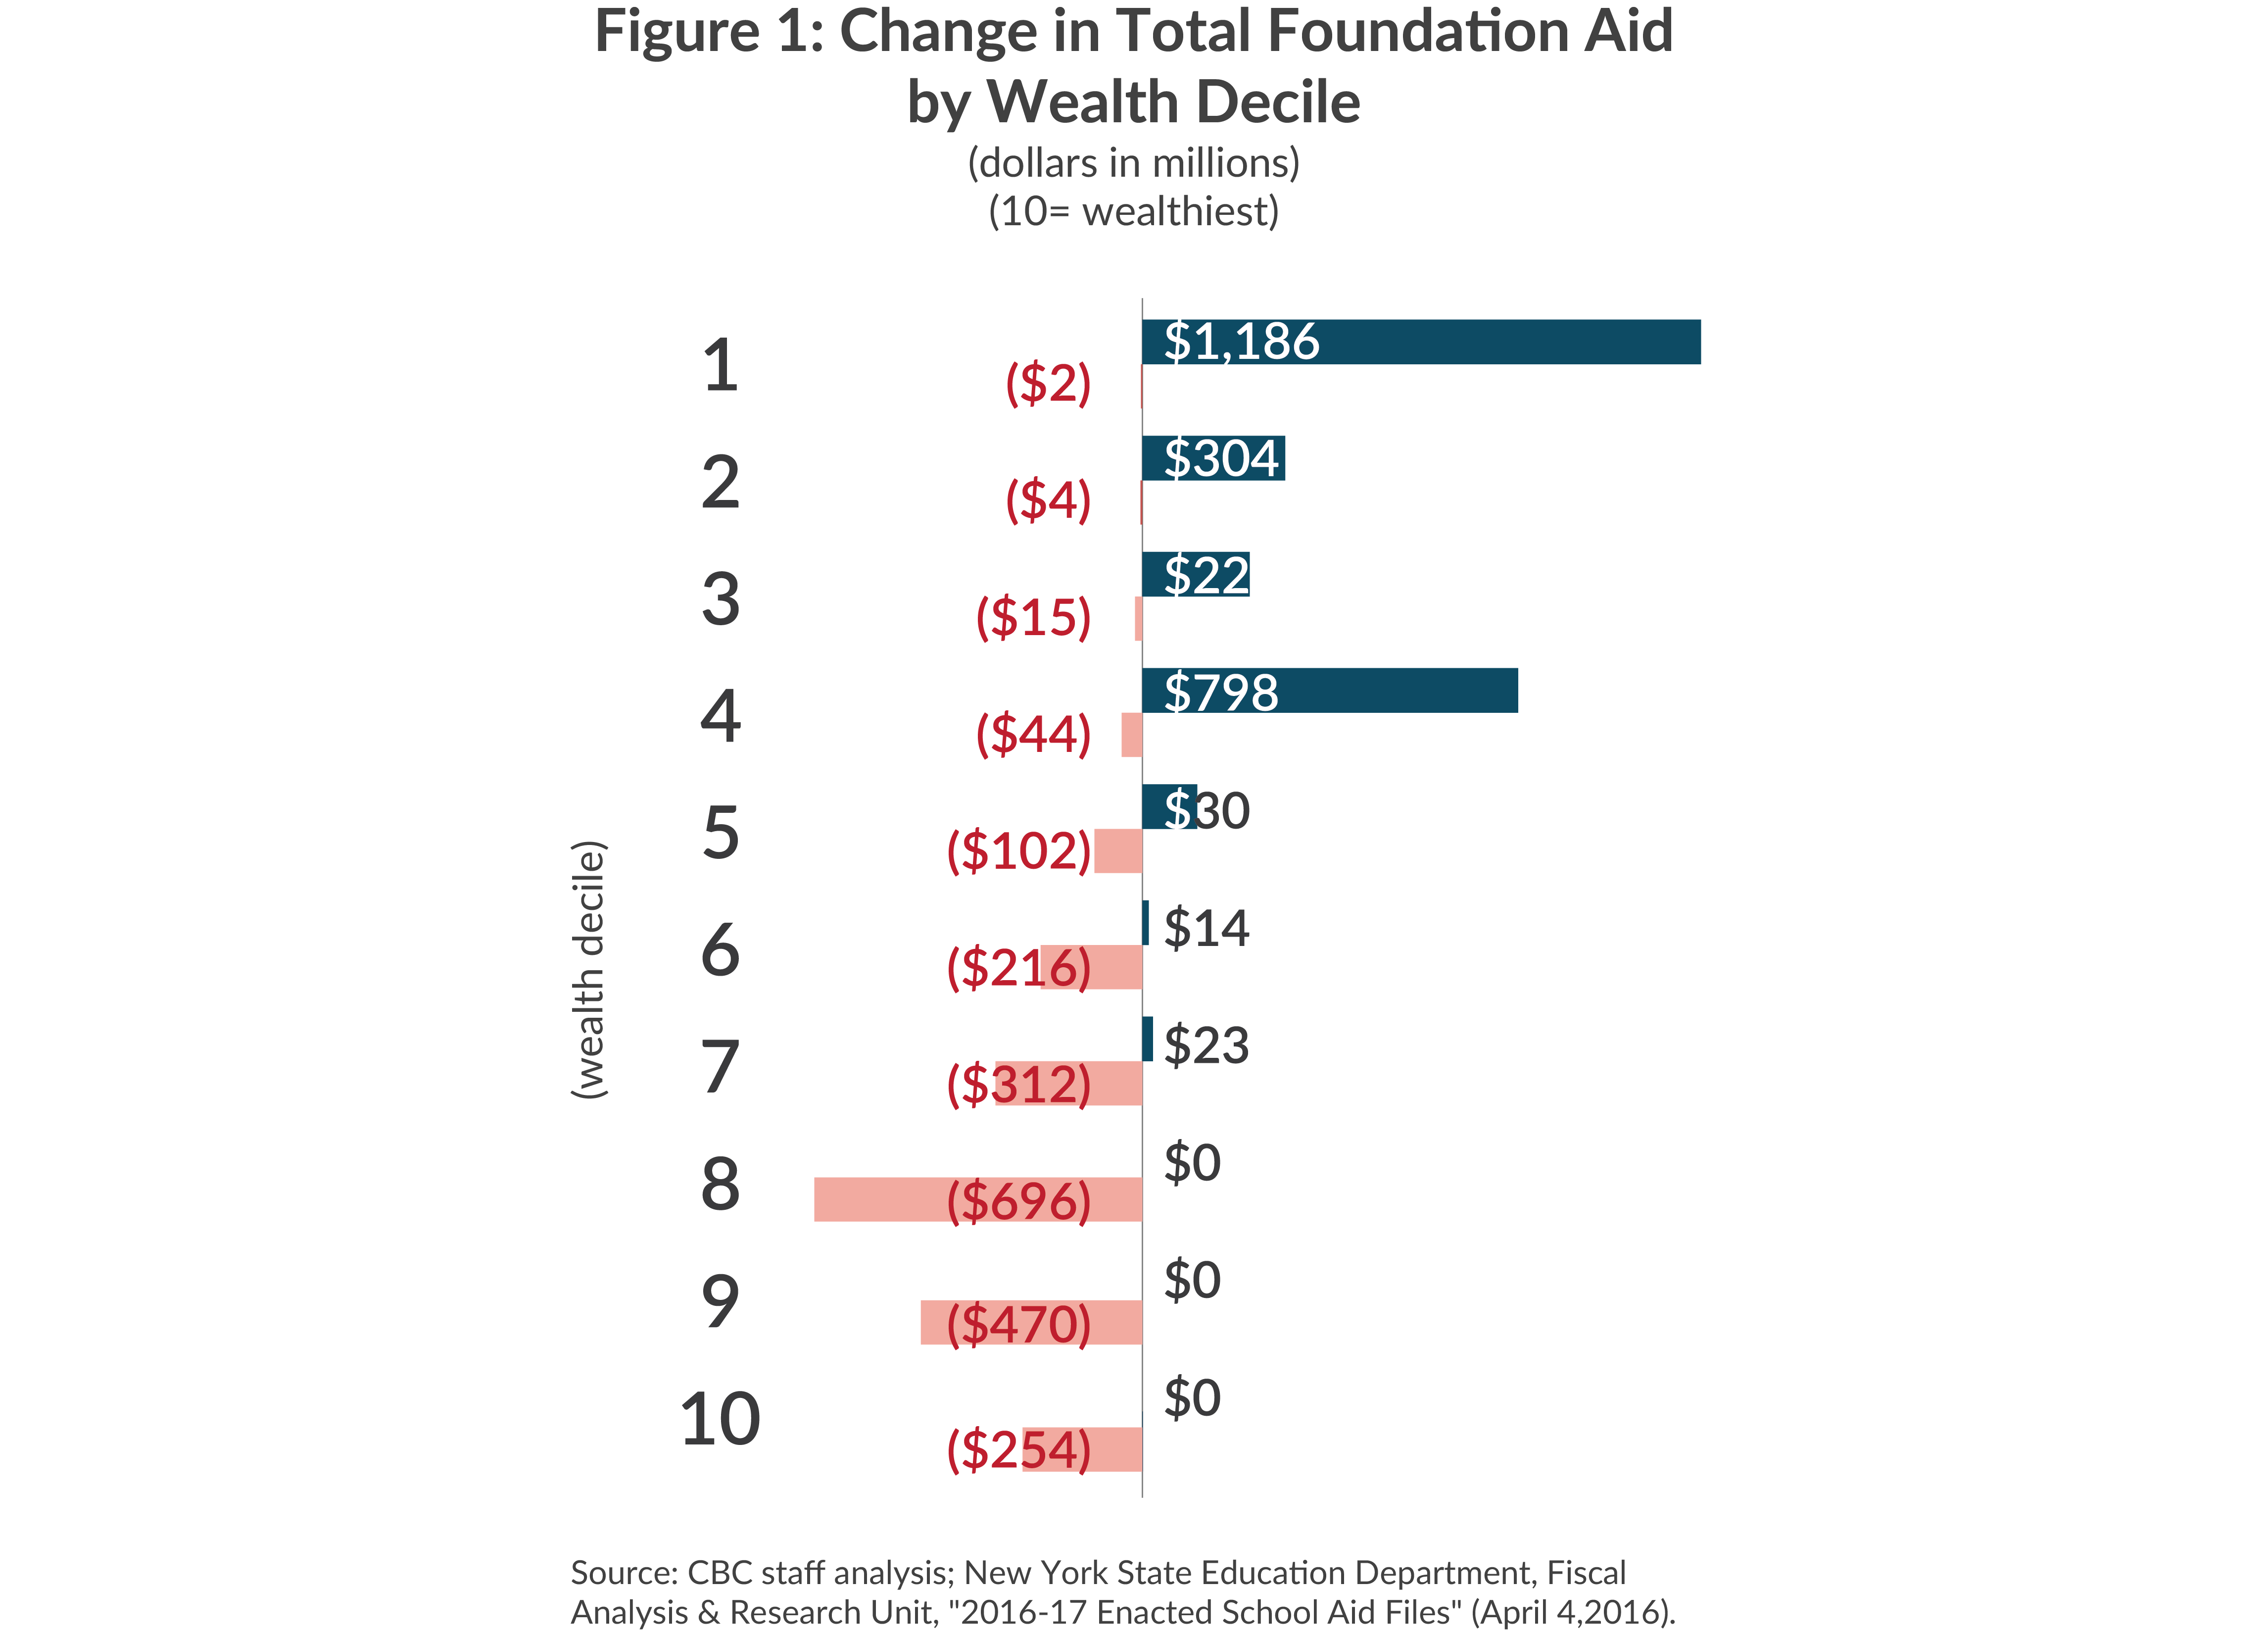 Bar chart of change in foundation aid by decile